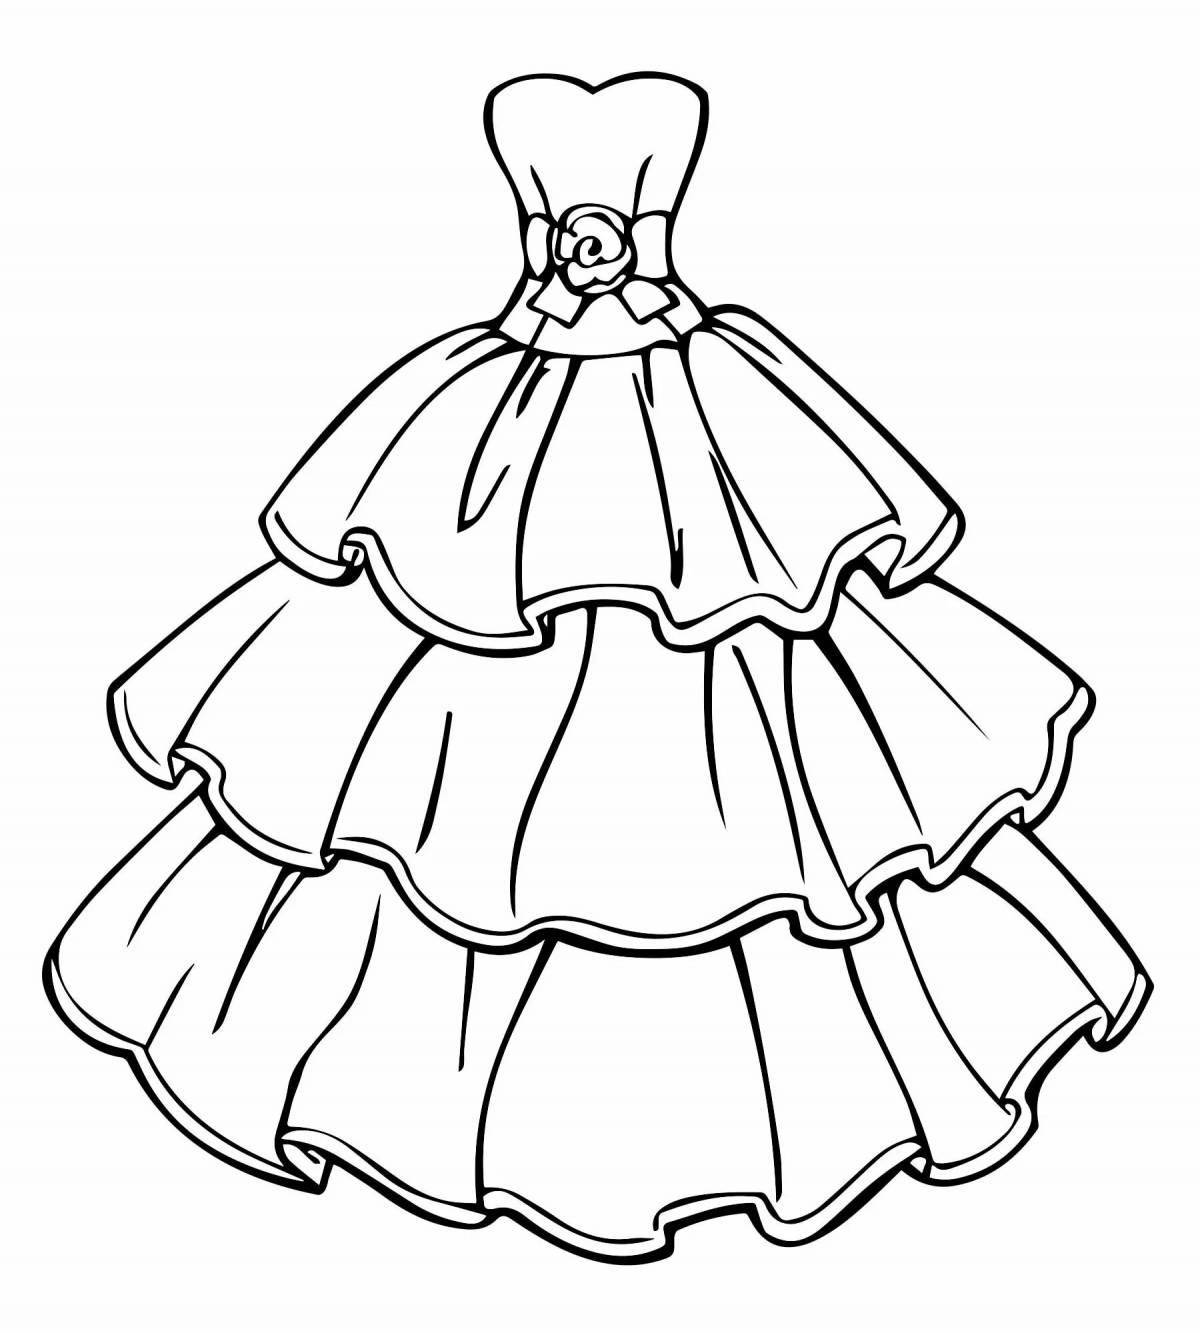 Coloring page shining dress for mom